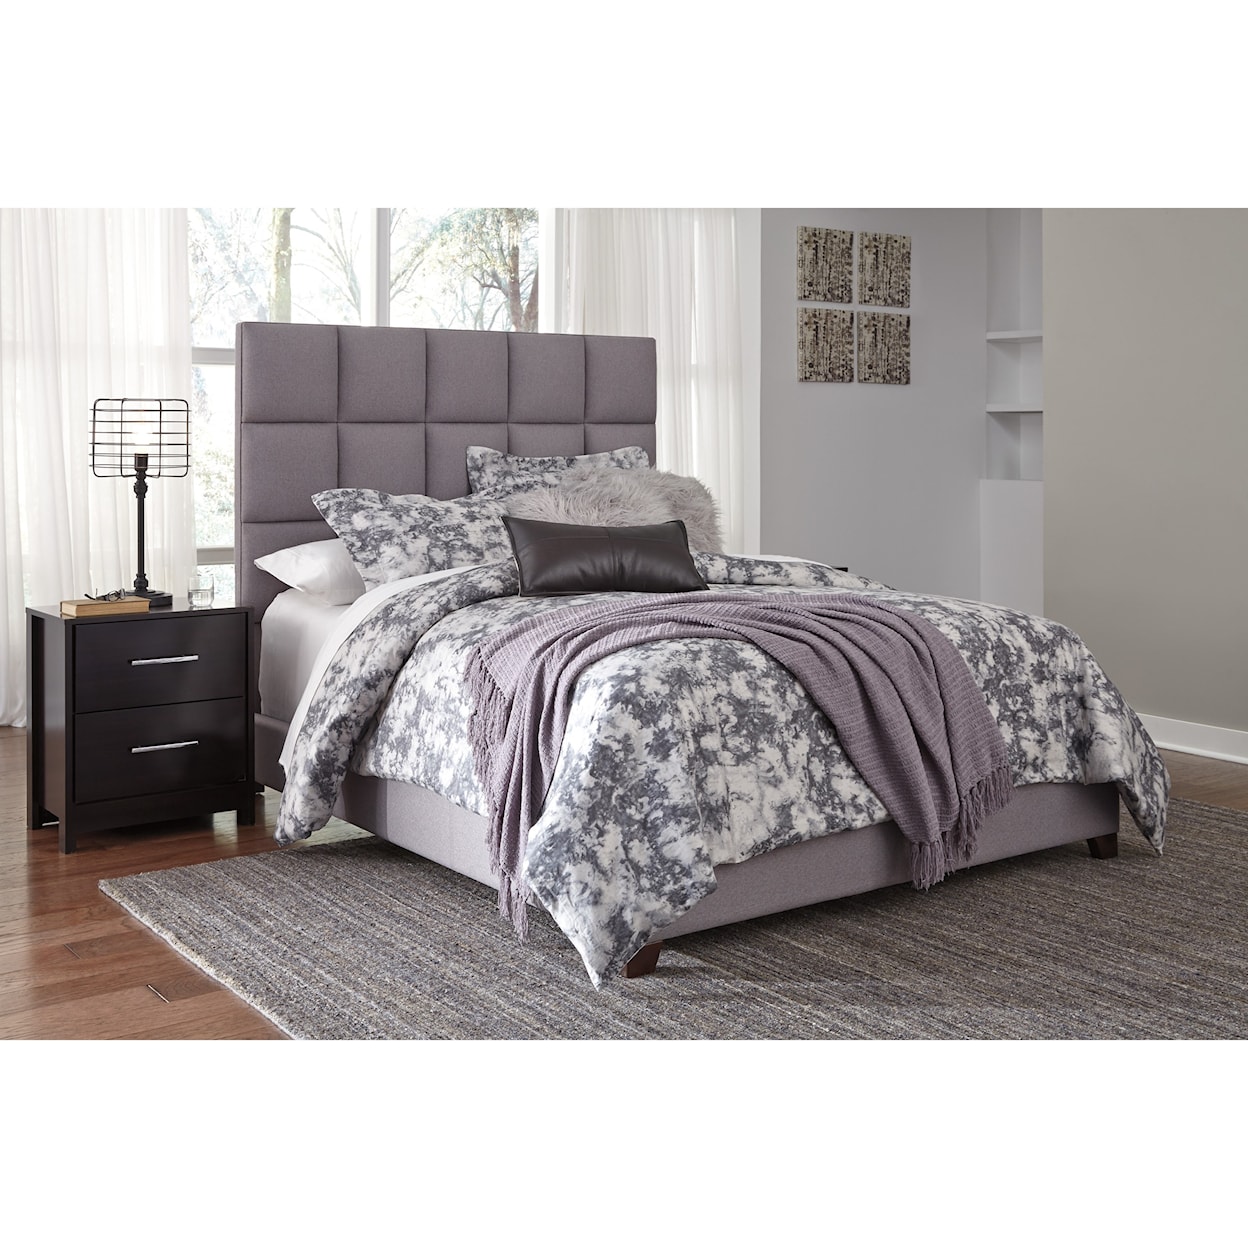 Signature Design by Ashley Contemporary Upholstered Beds B130-381 Queen ...